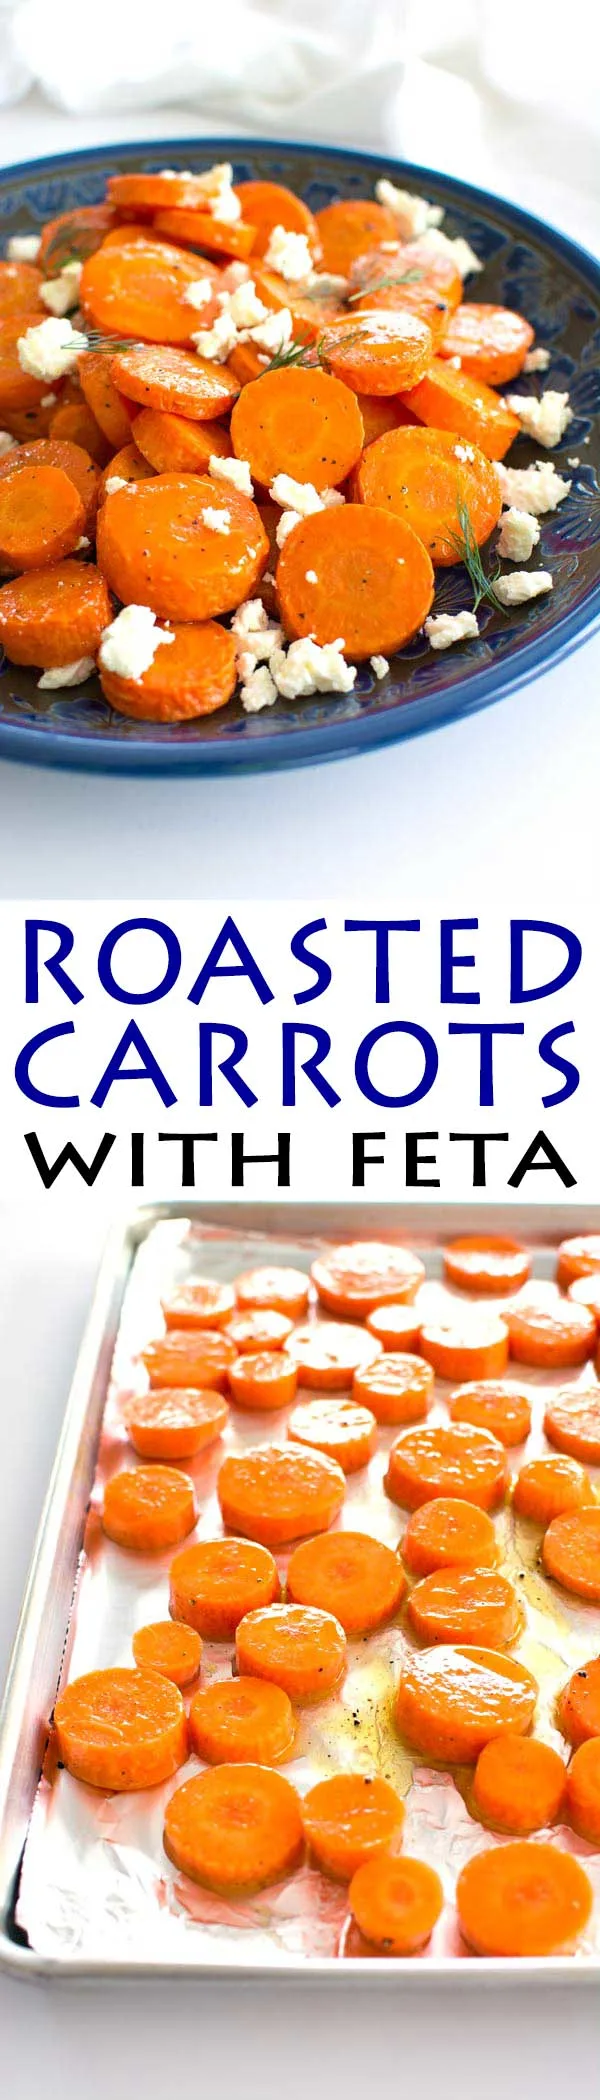 Oven roasted carrots with feta cheese is a super easy (and delicious) side dish!